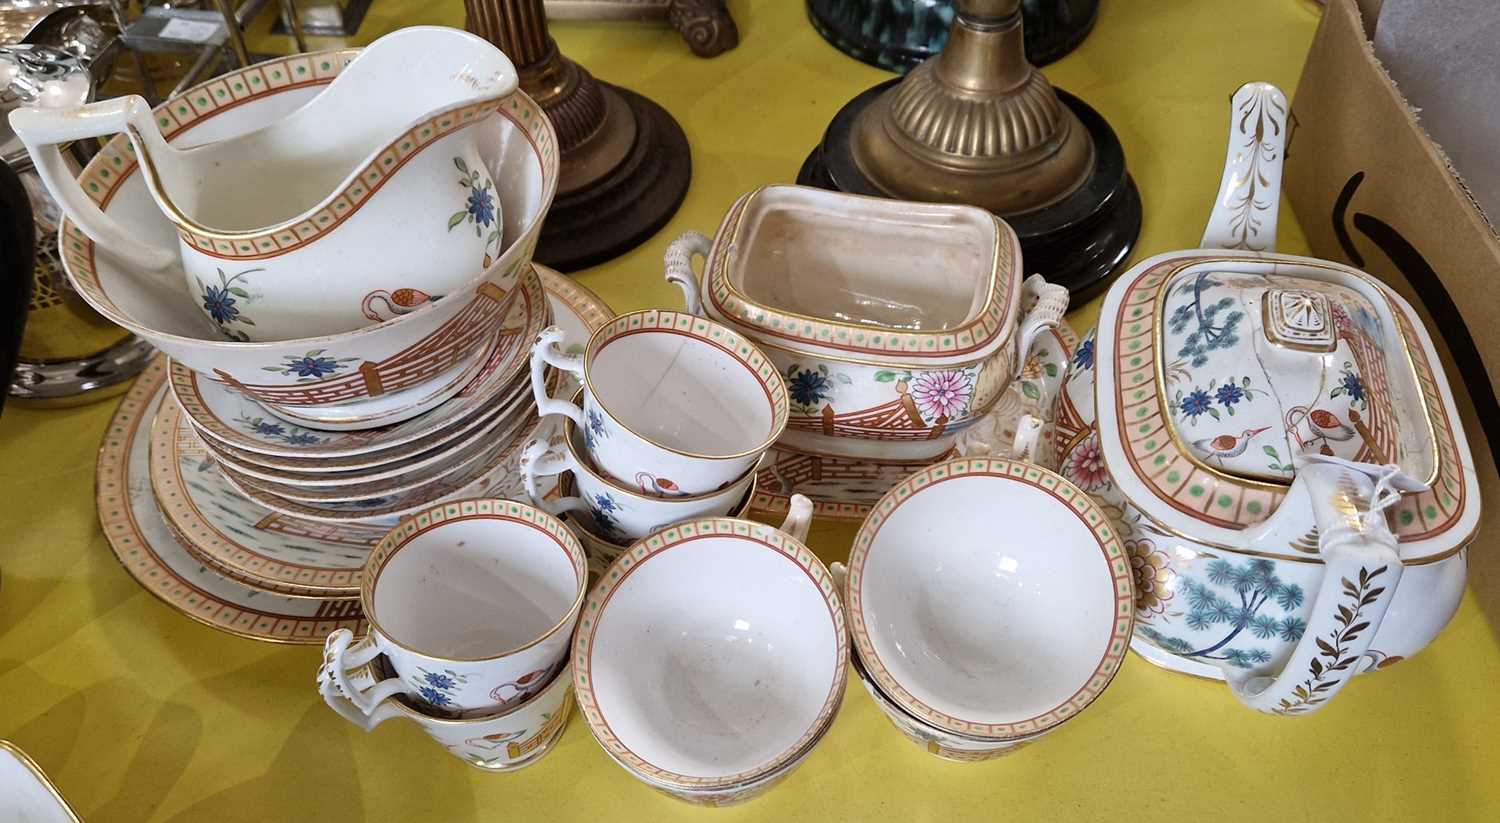 A 19th century hand-painted part teaset with Chinoiserie decoration.